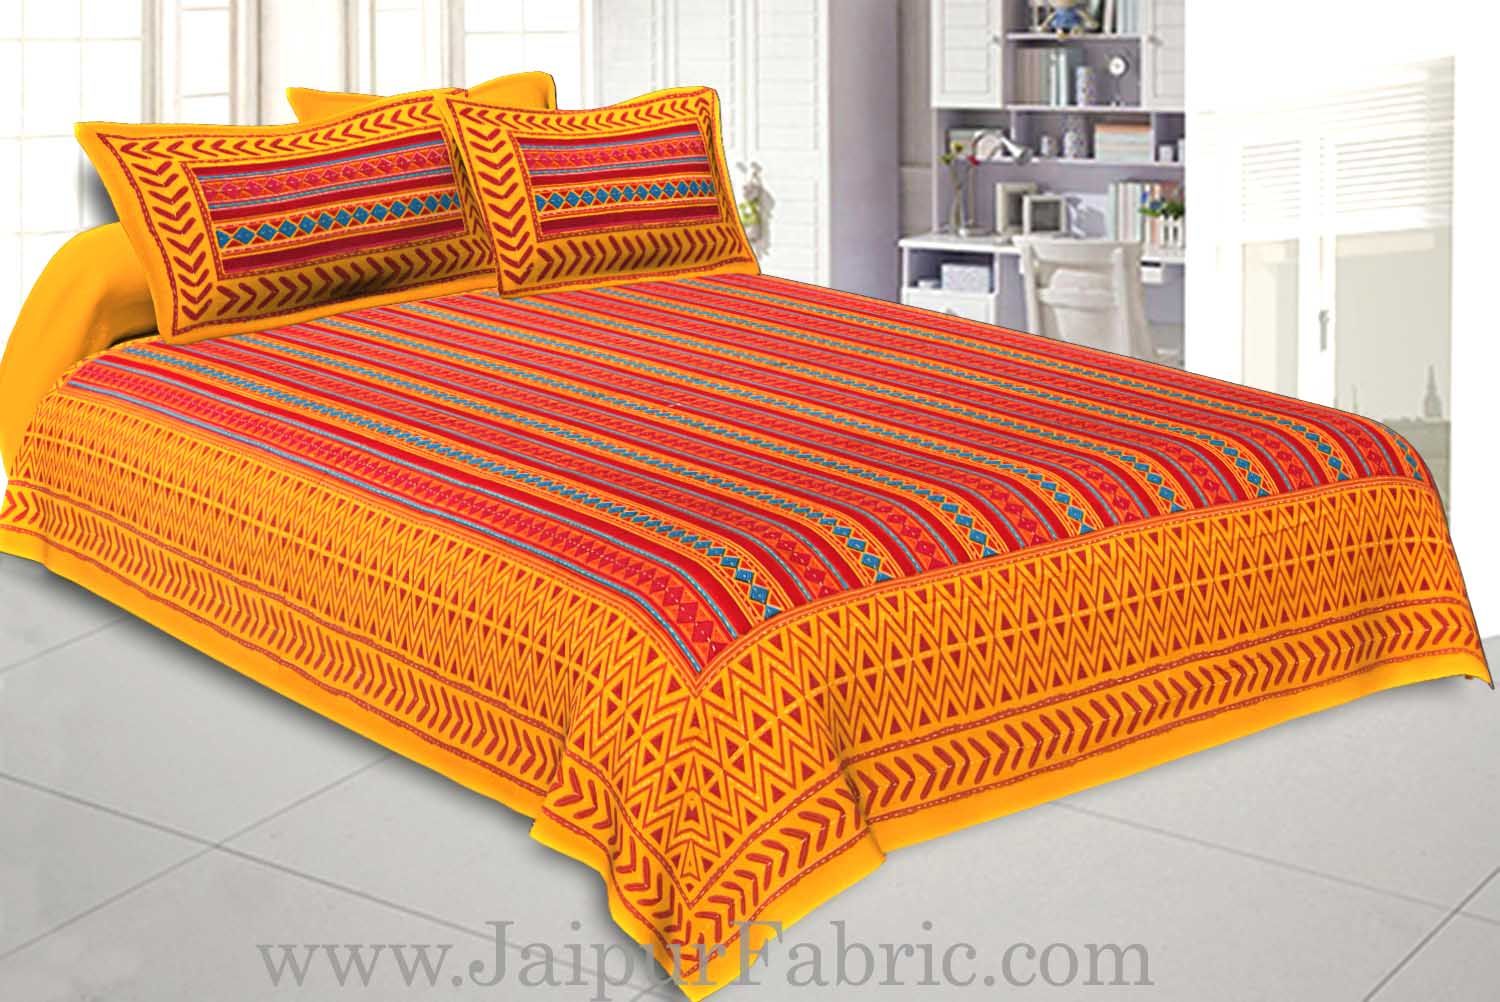 Double bedsheet Katha Work Yellow Border Zig-Zag Print With Two Pillow Cover